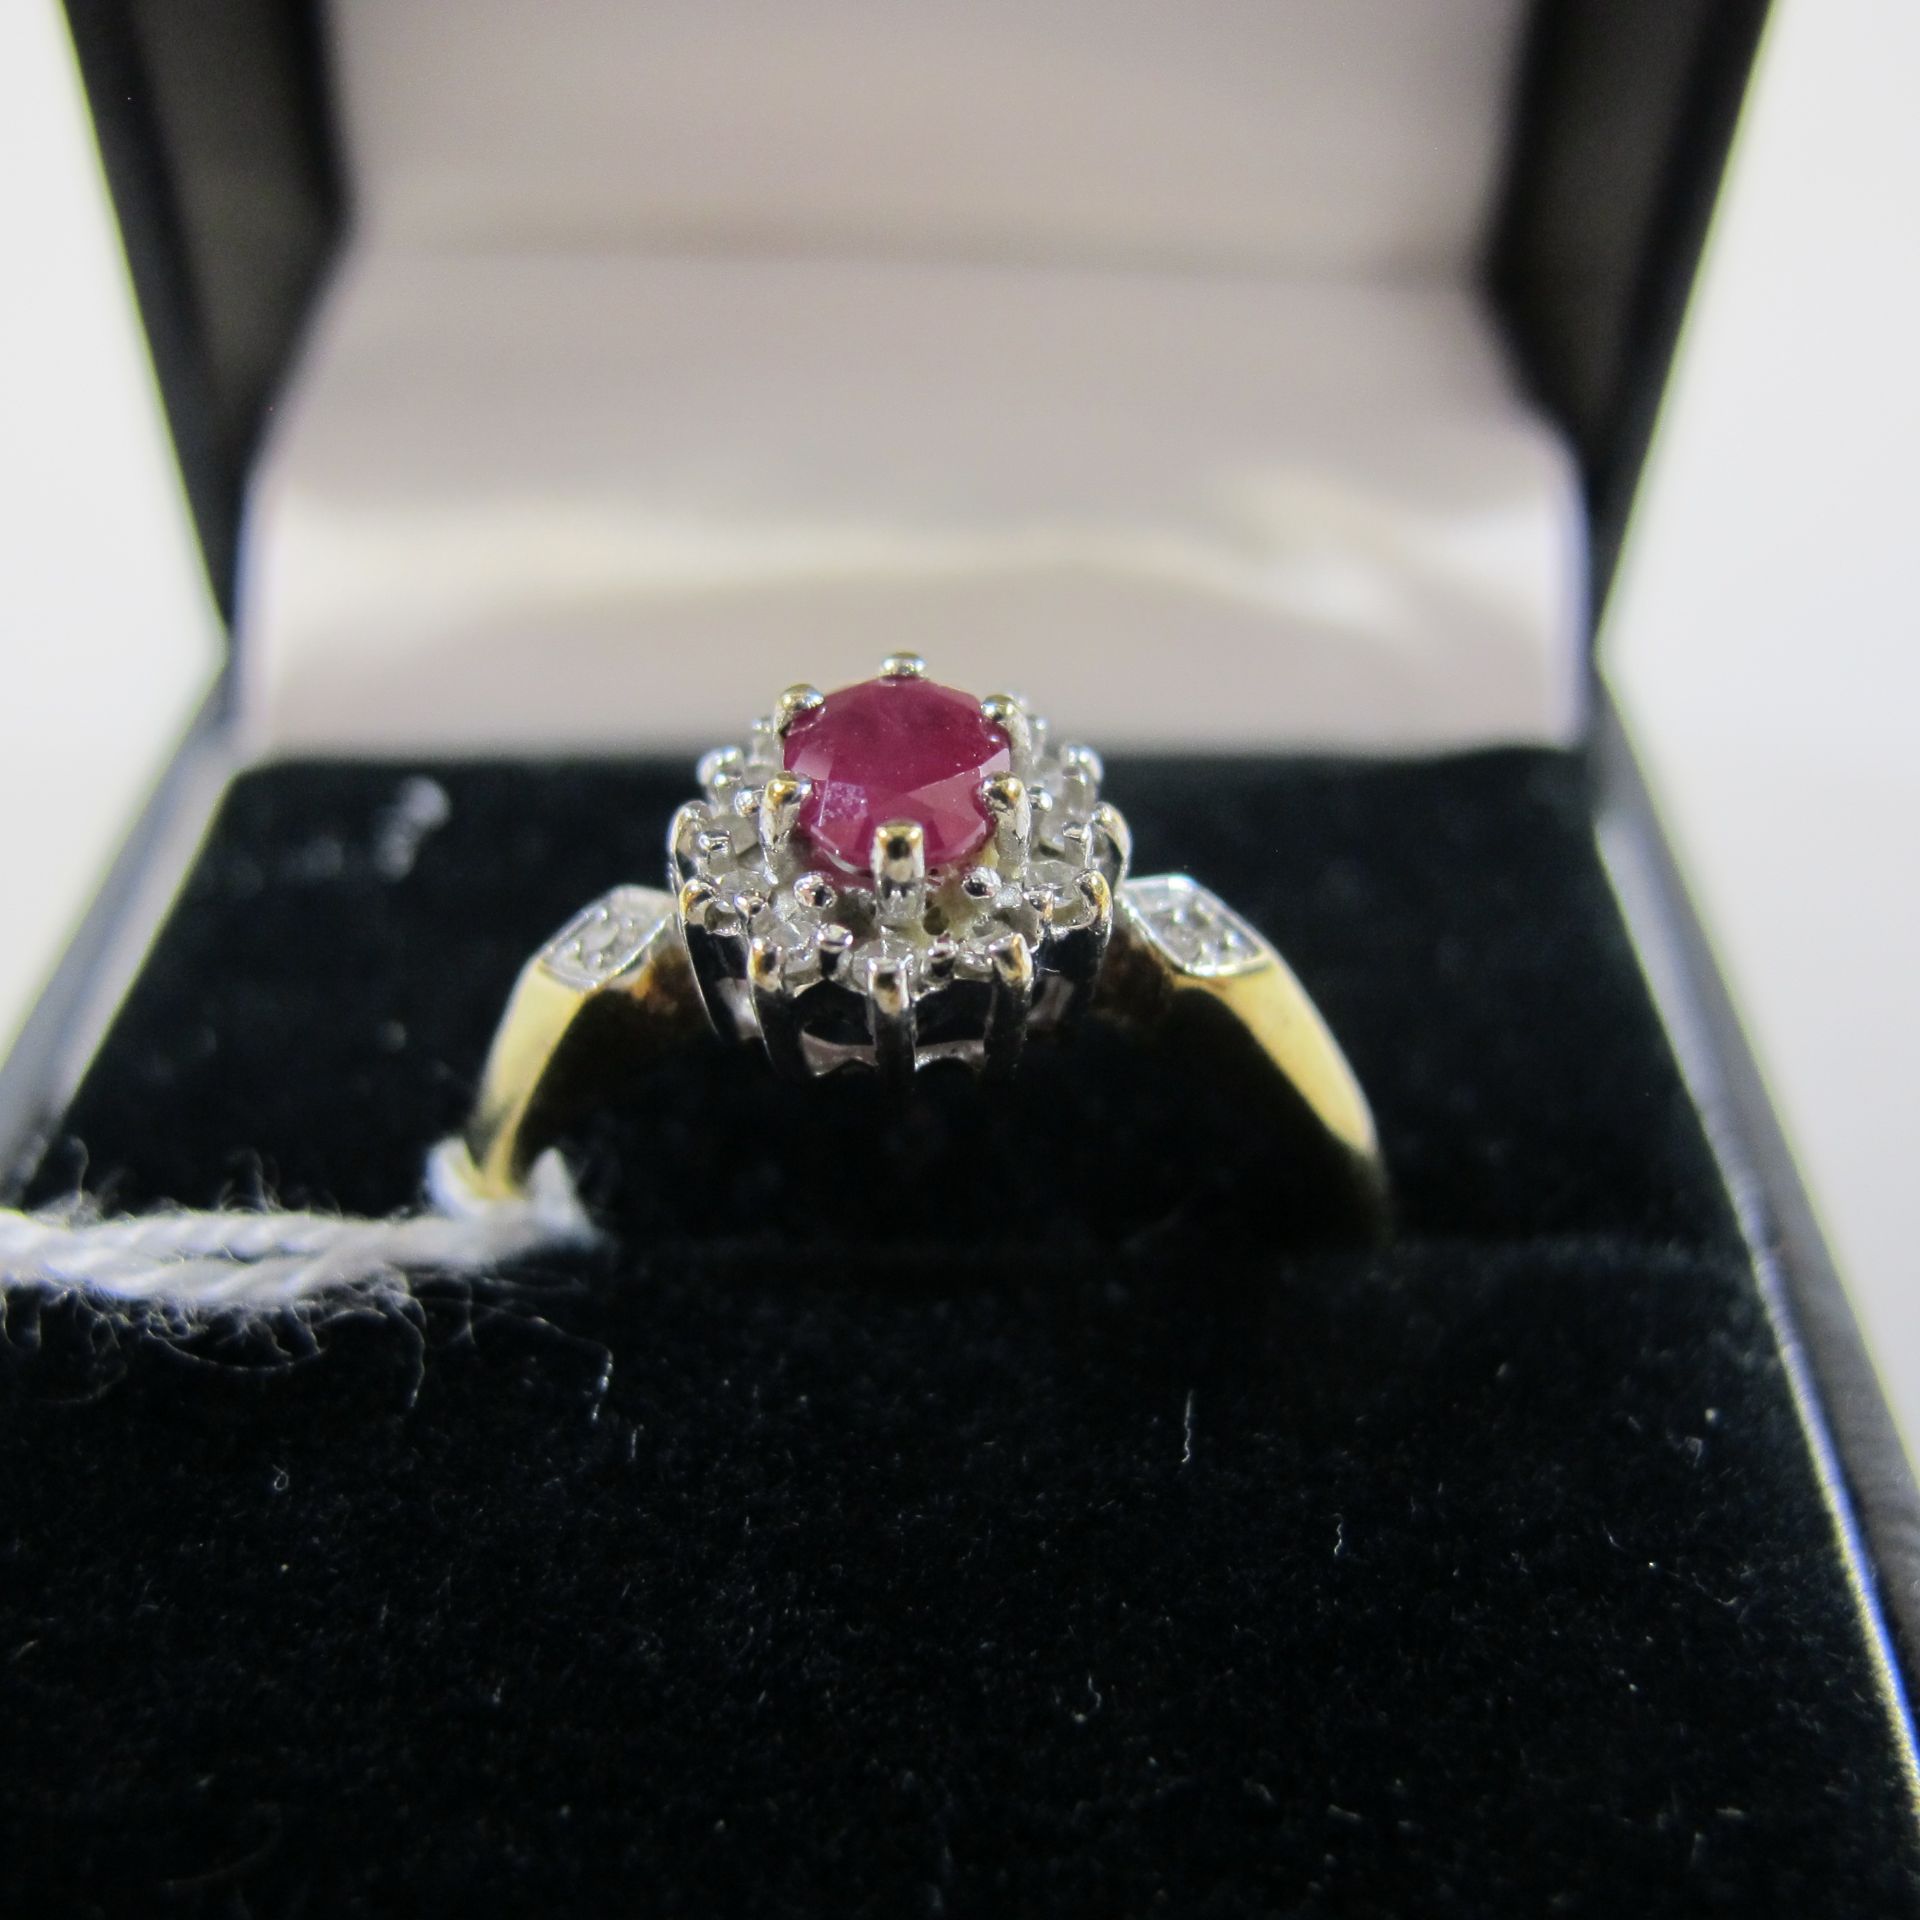 9ct Gold Ruby and Diamond Set Ring, size O½' (est £50-£100)